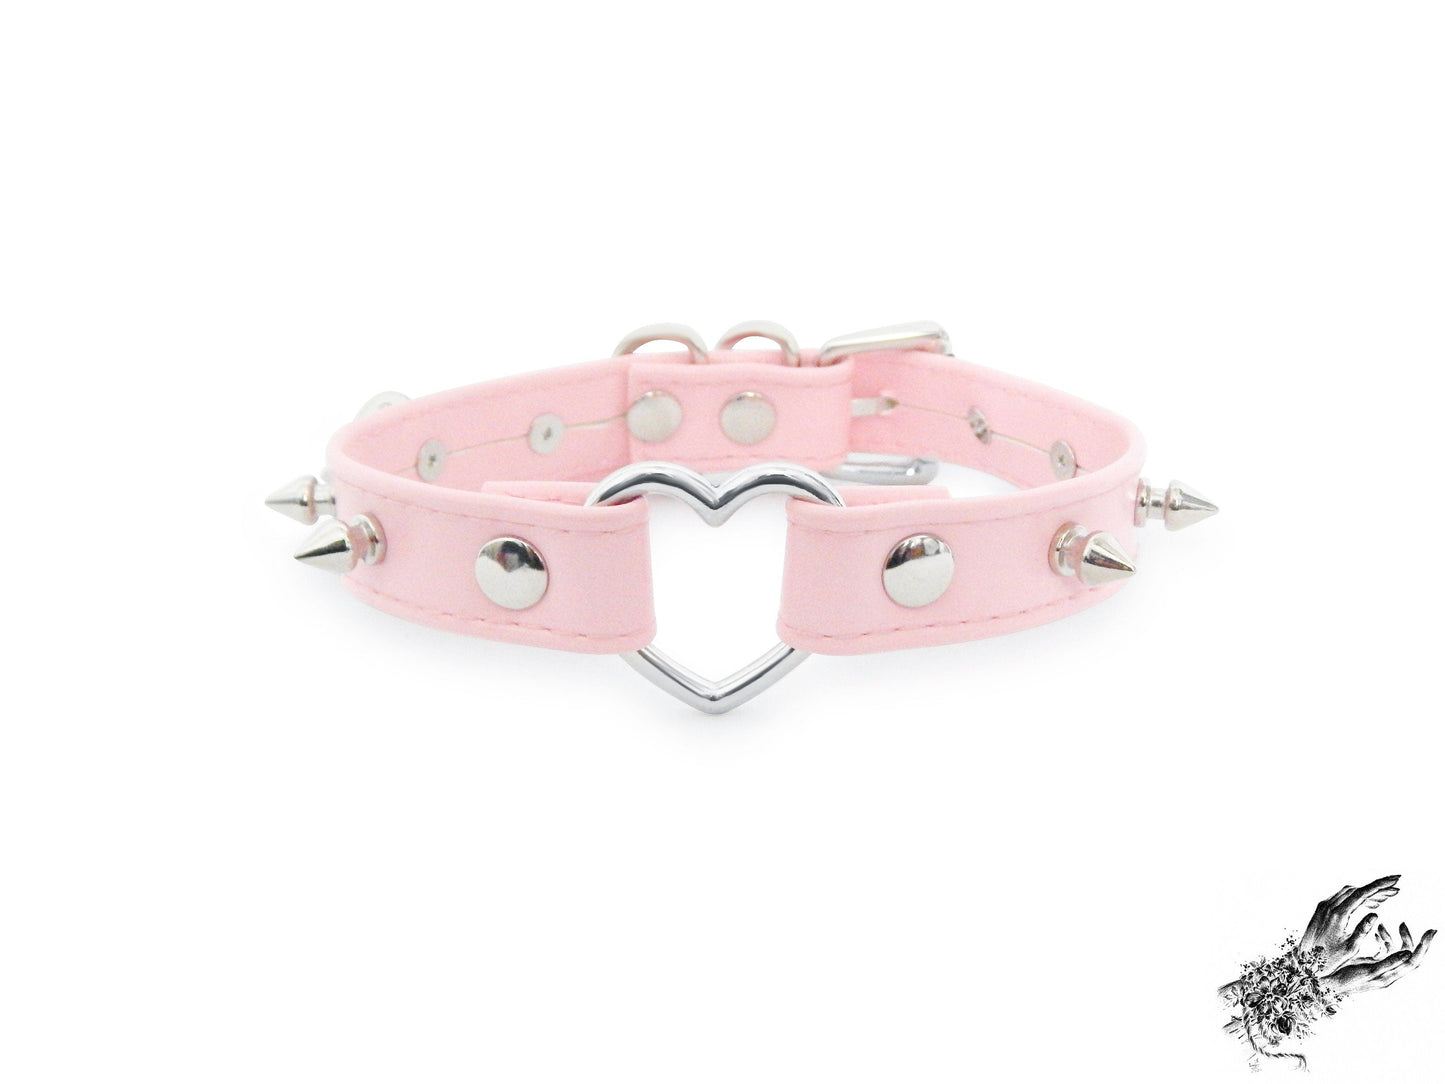 Pink Faux Leather Studded Heart Ring Choker - LARGE SIZE